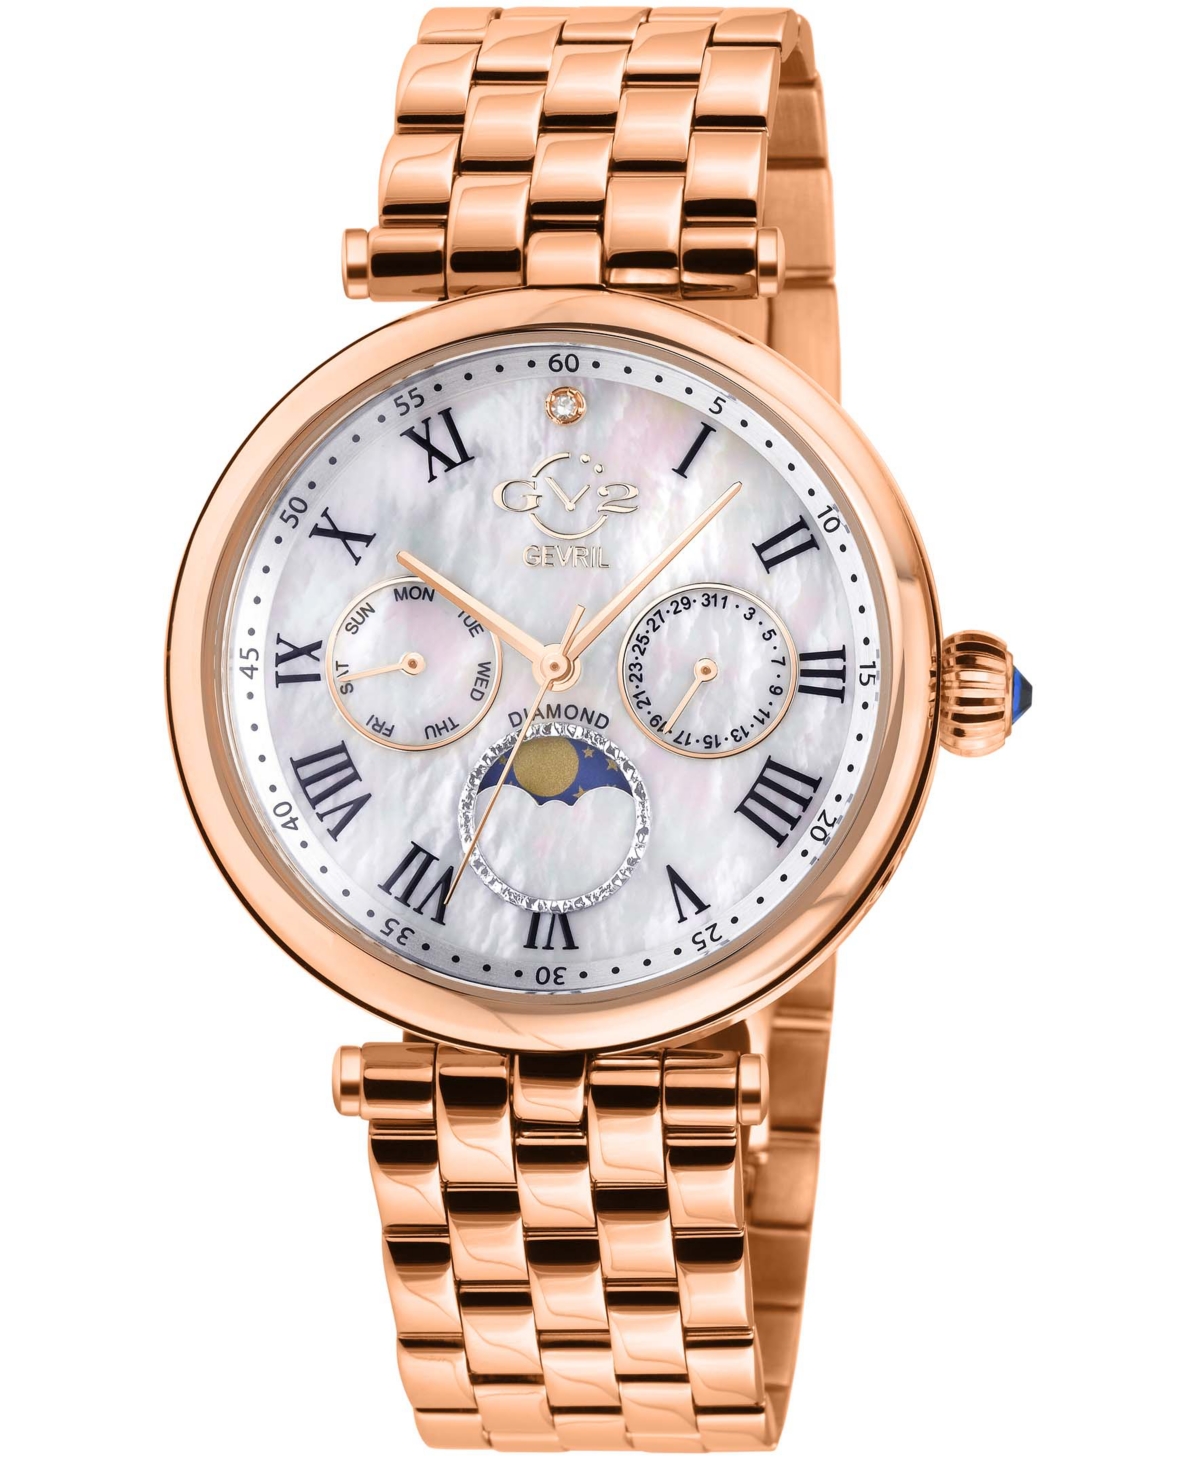 Gv2 By Gevril Women's Florence Rose Gold Stainless Steel Watch 36mm